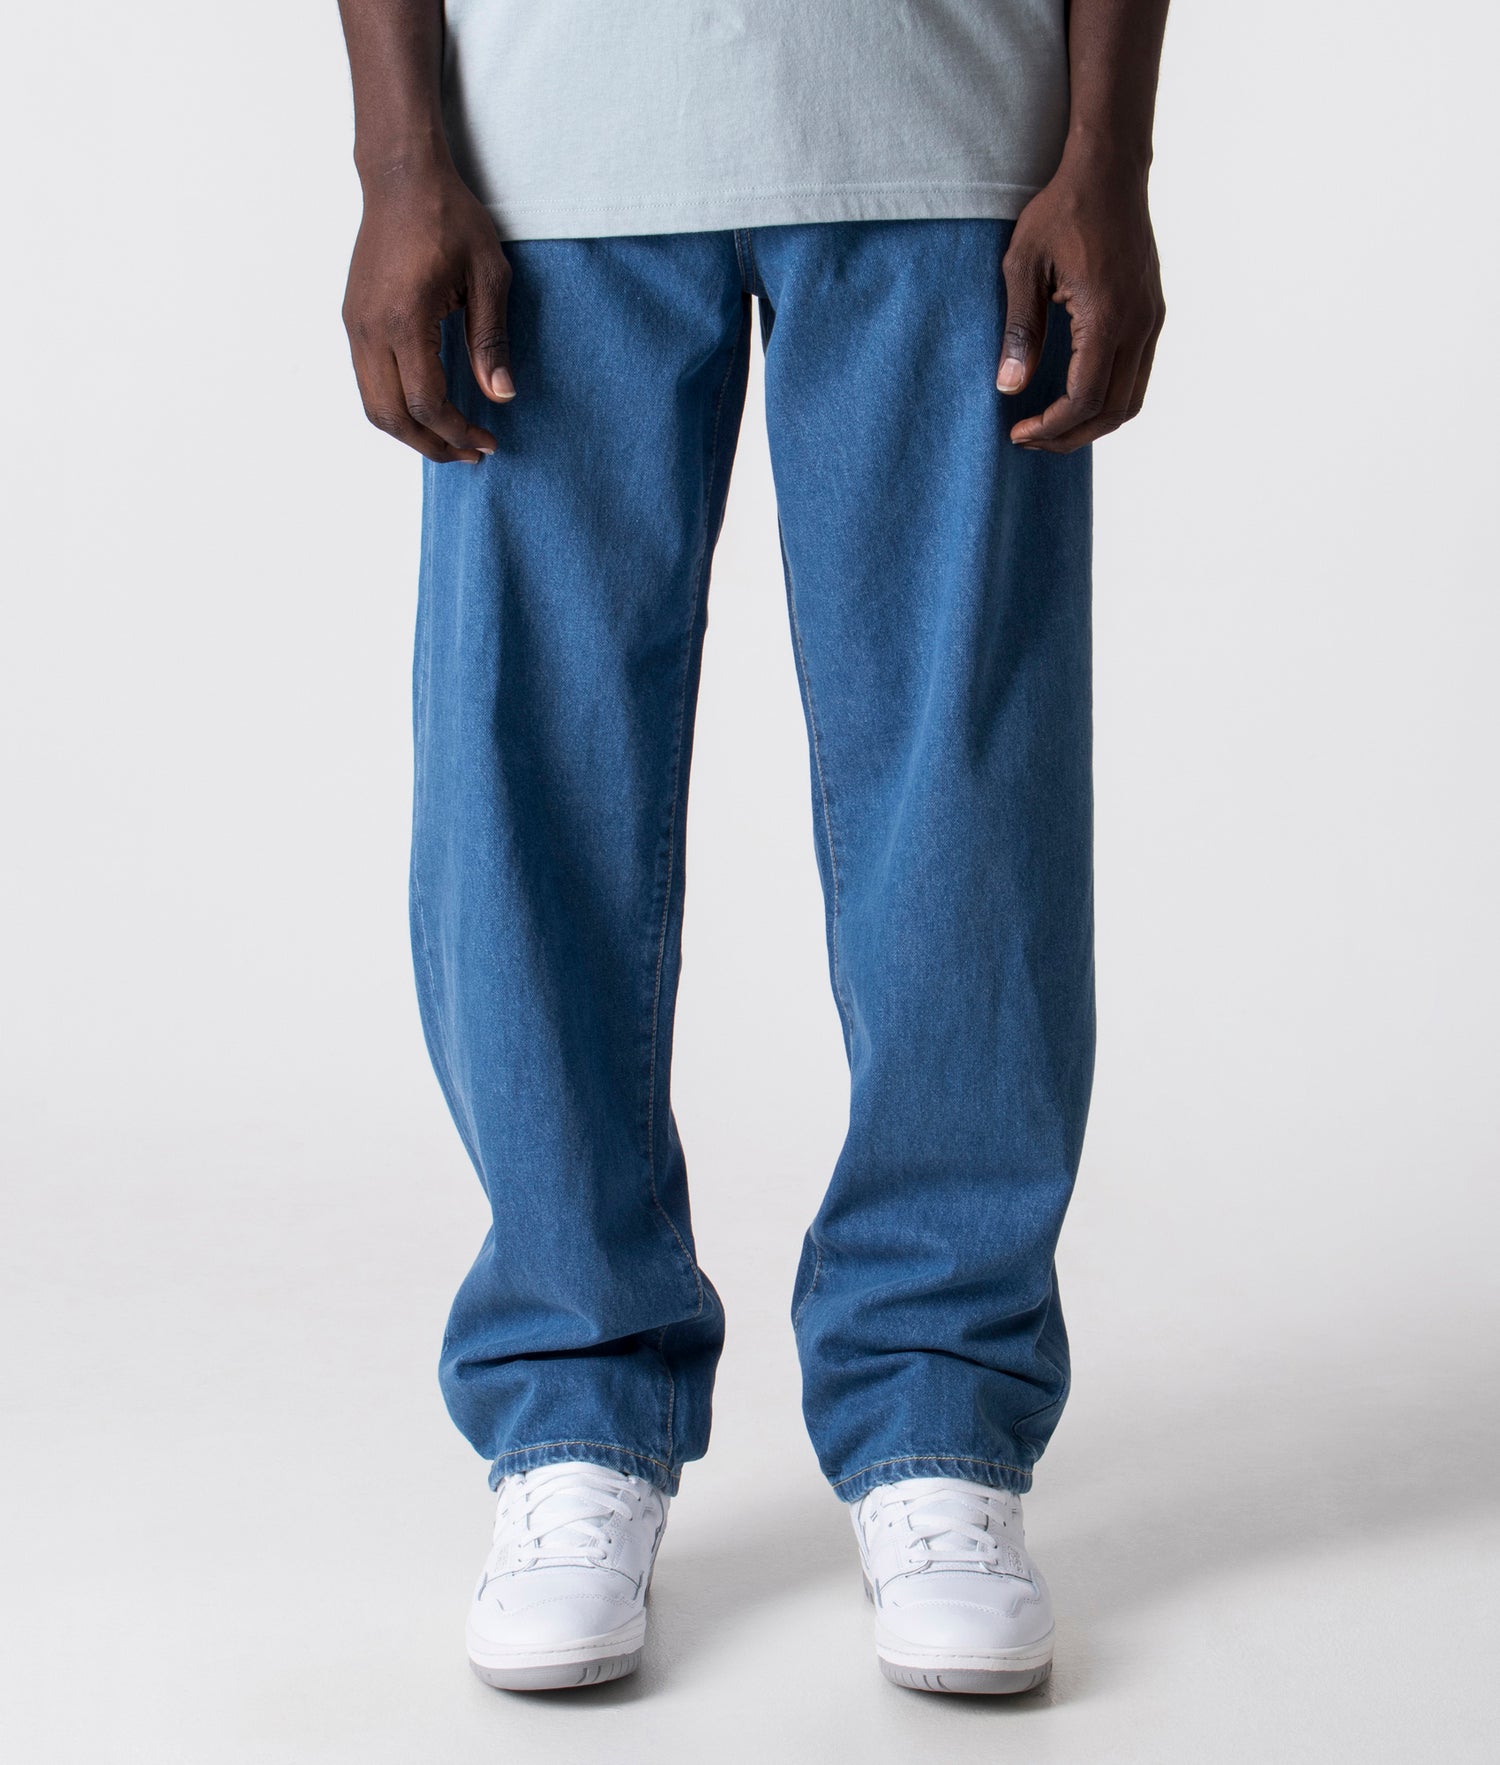 REELL Baggy Jeans